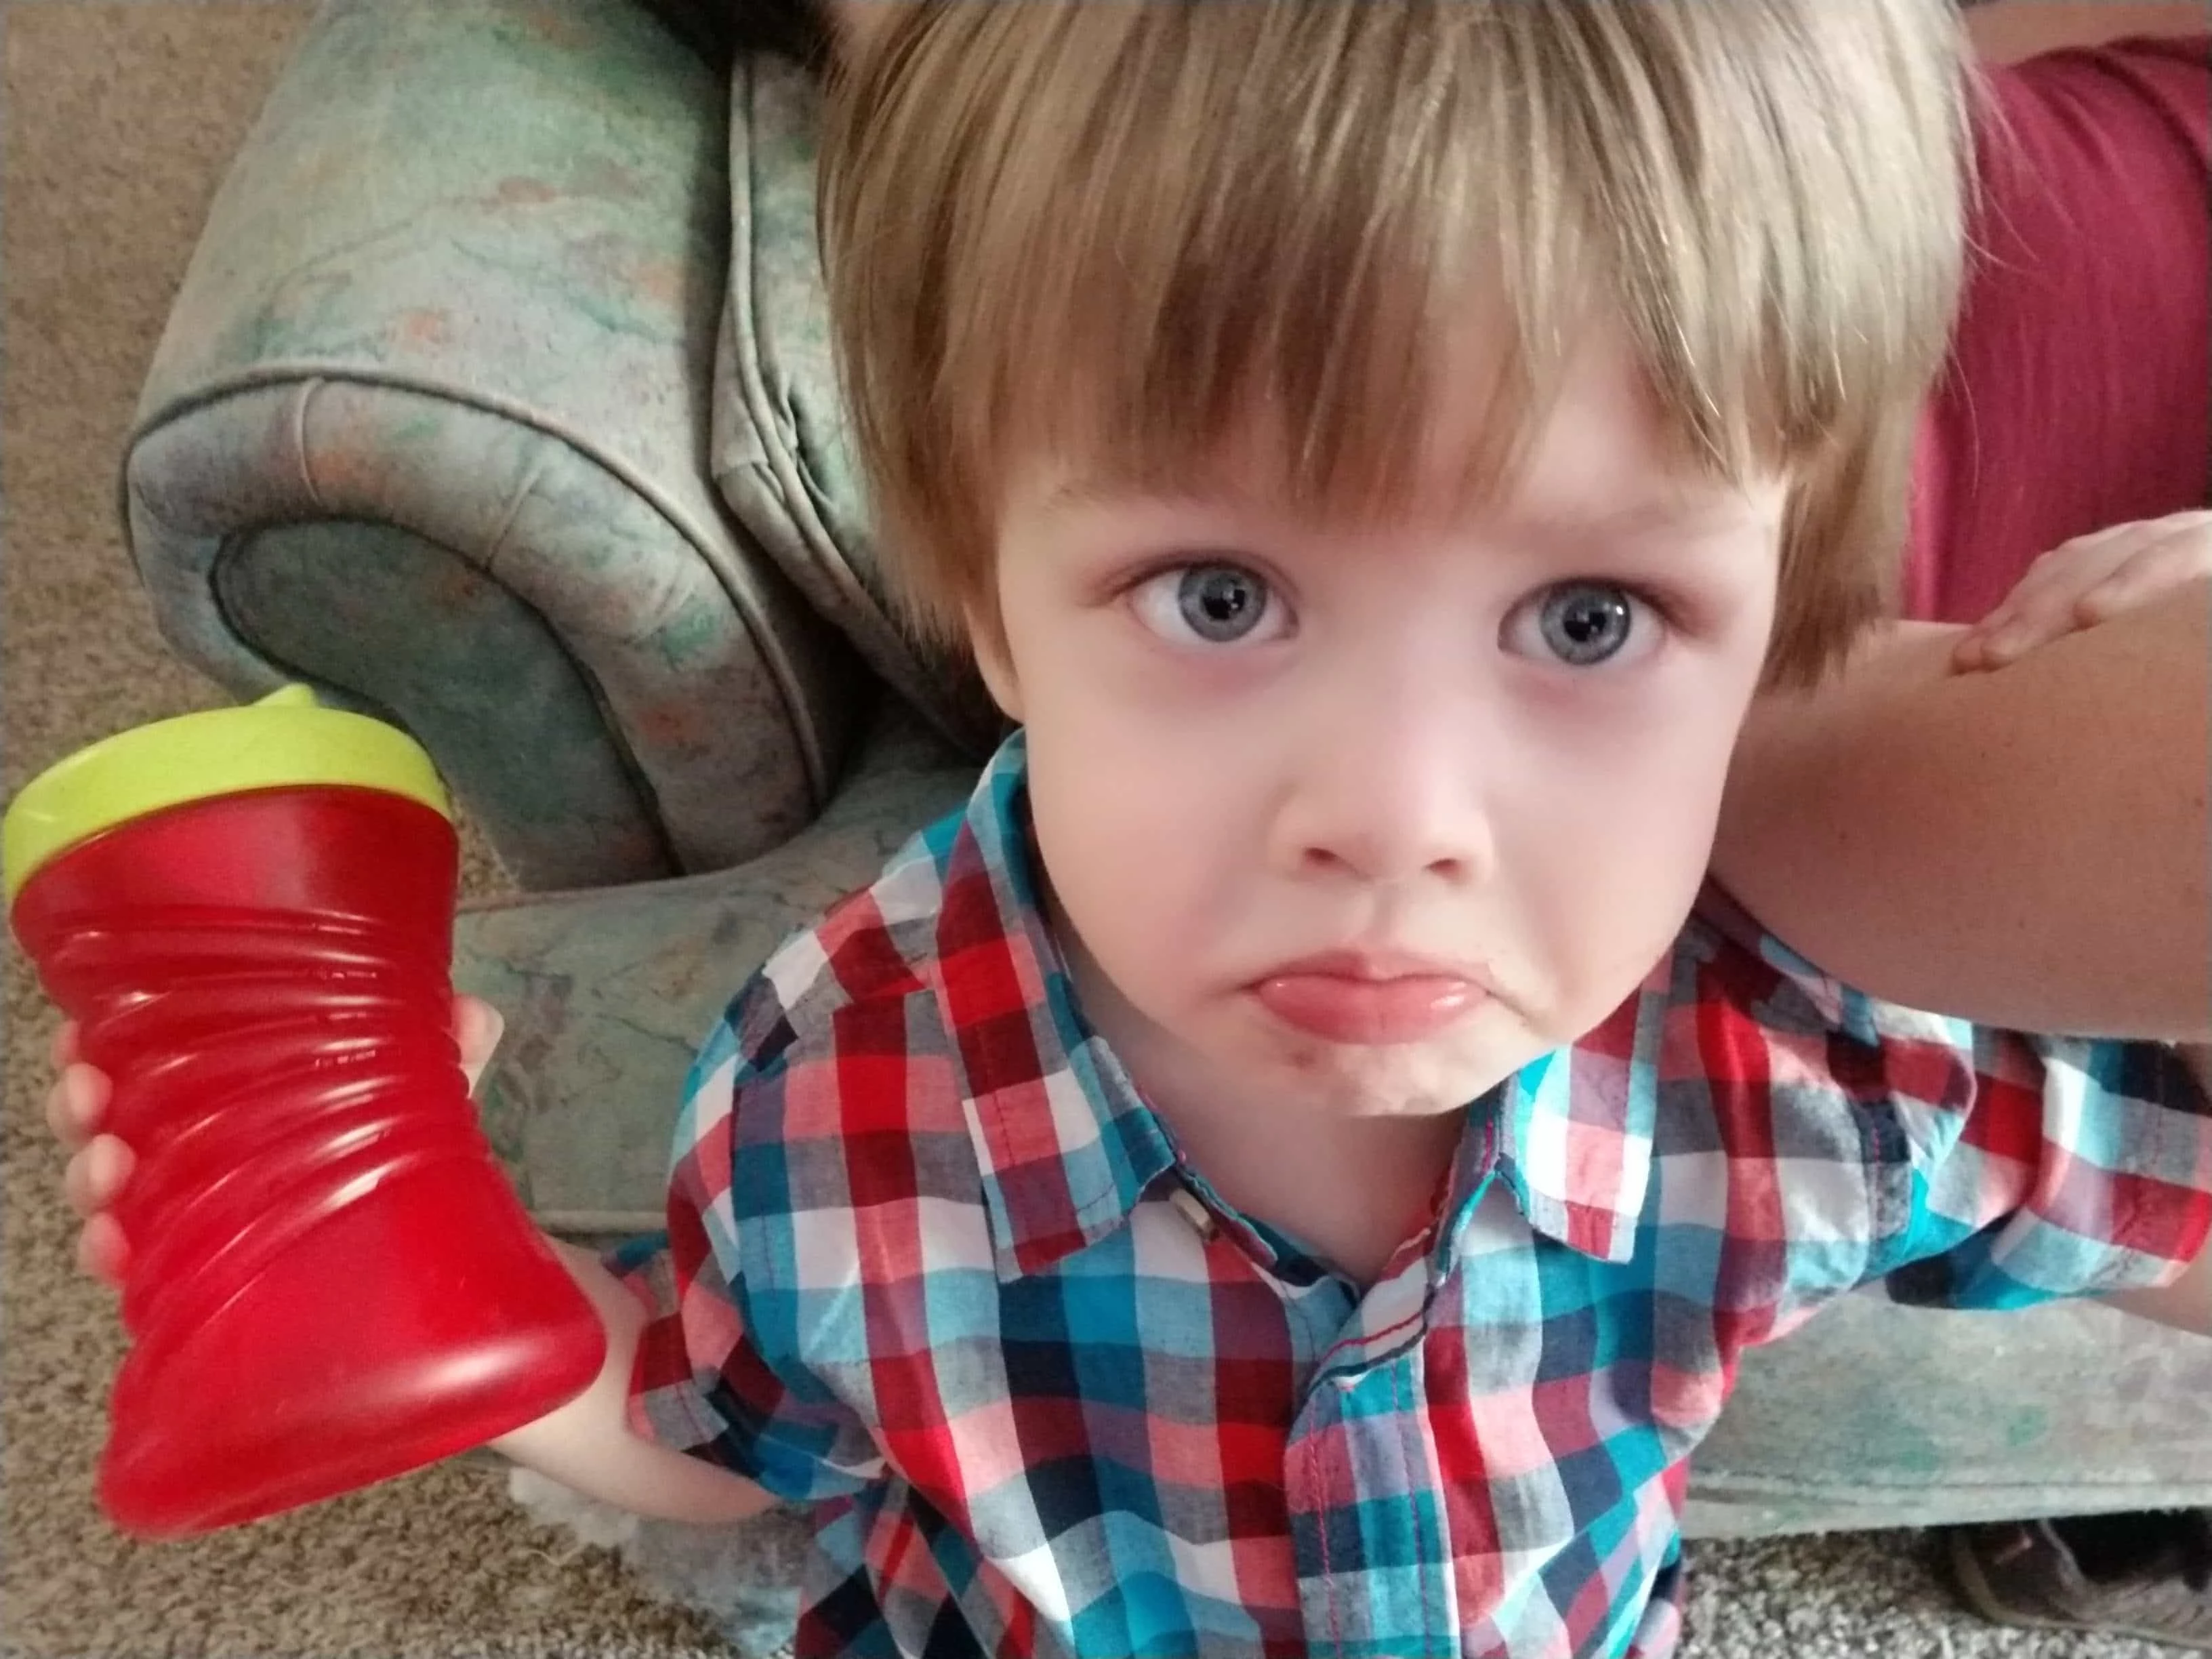 Dairy of a Mom - I'm not ignoring my son. My son had a tantrum in the middle of the grocery store, let me set the record straight.